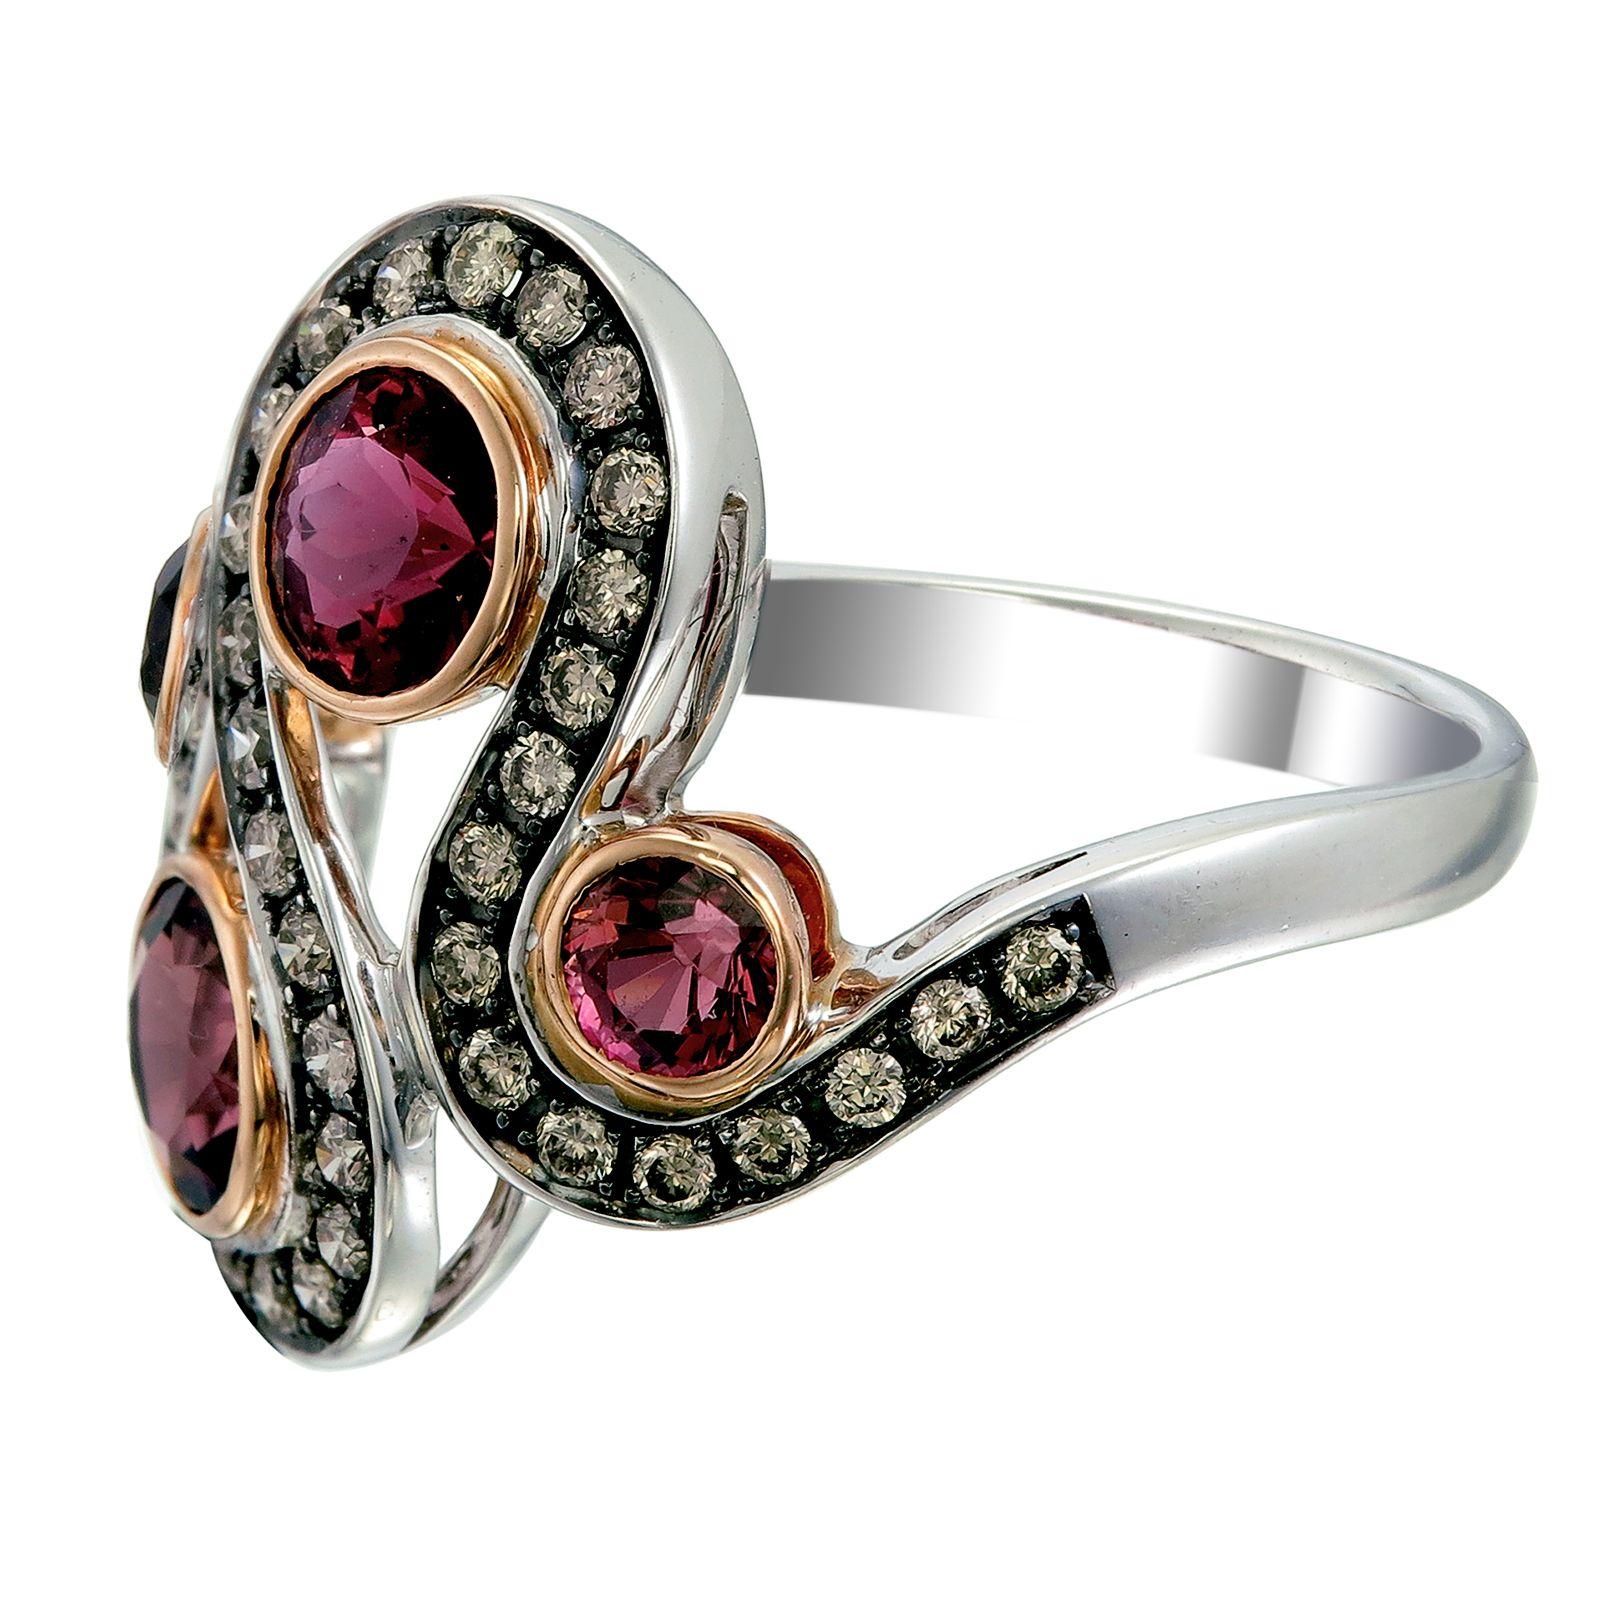 Aesthetic Movement Zorab Creation The Serpent Pink Tourmaline and Diamond Ring For Sale